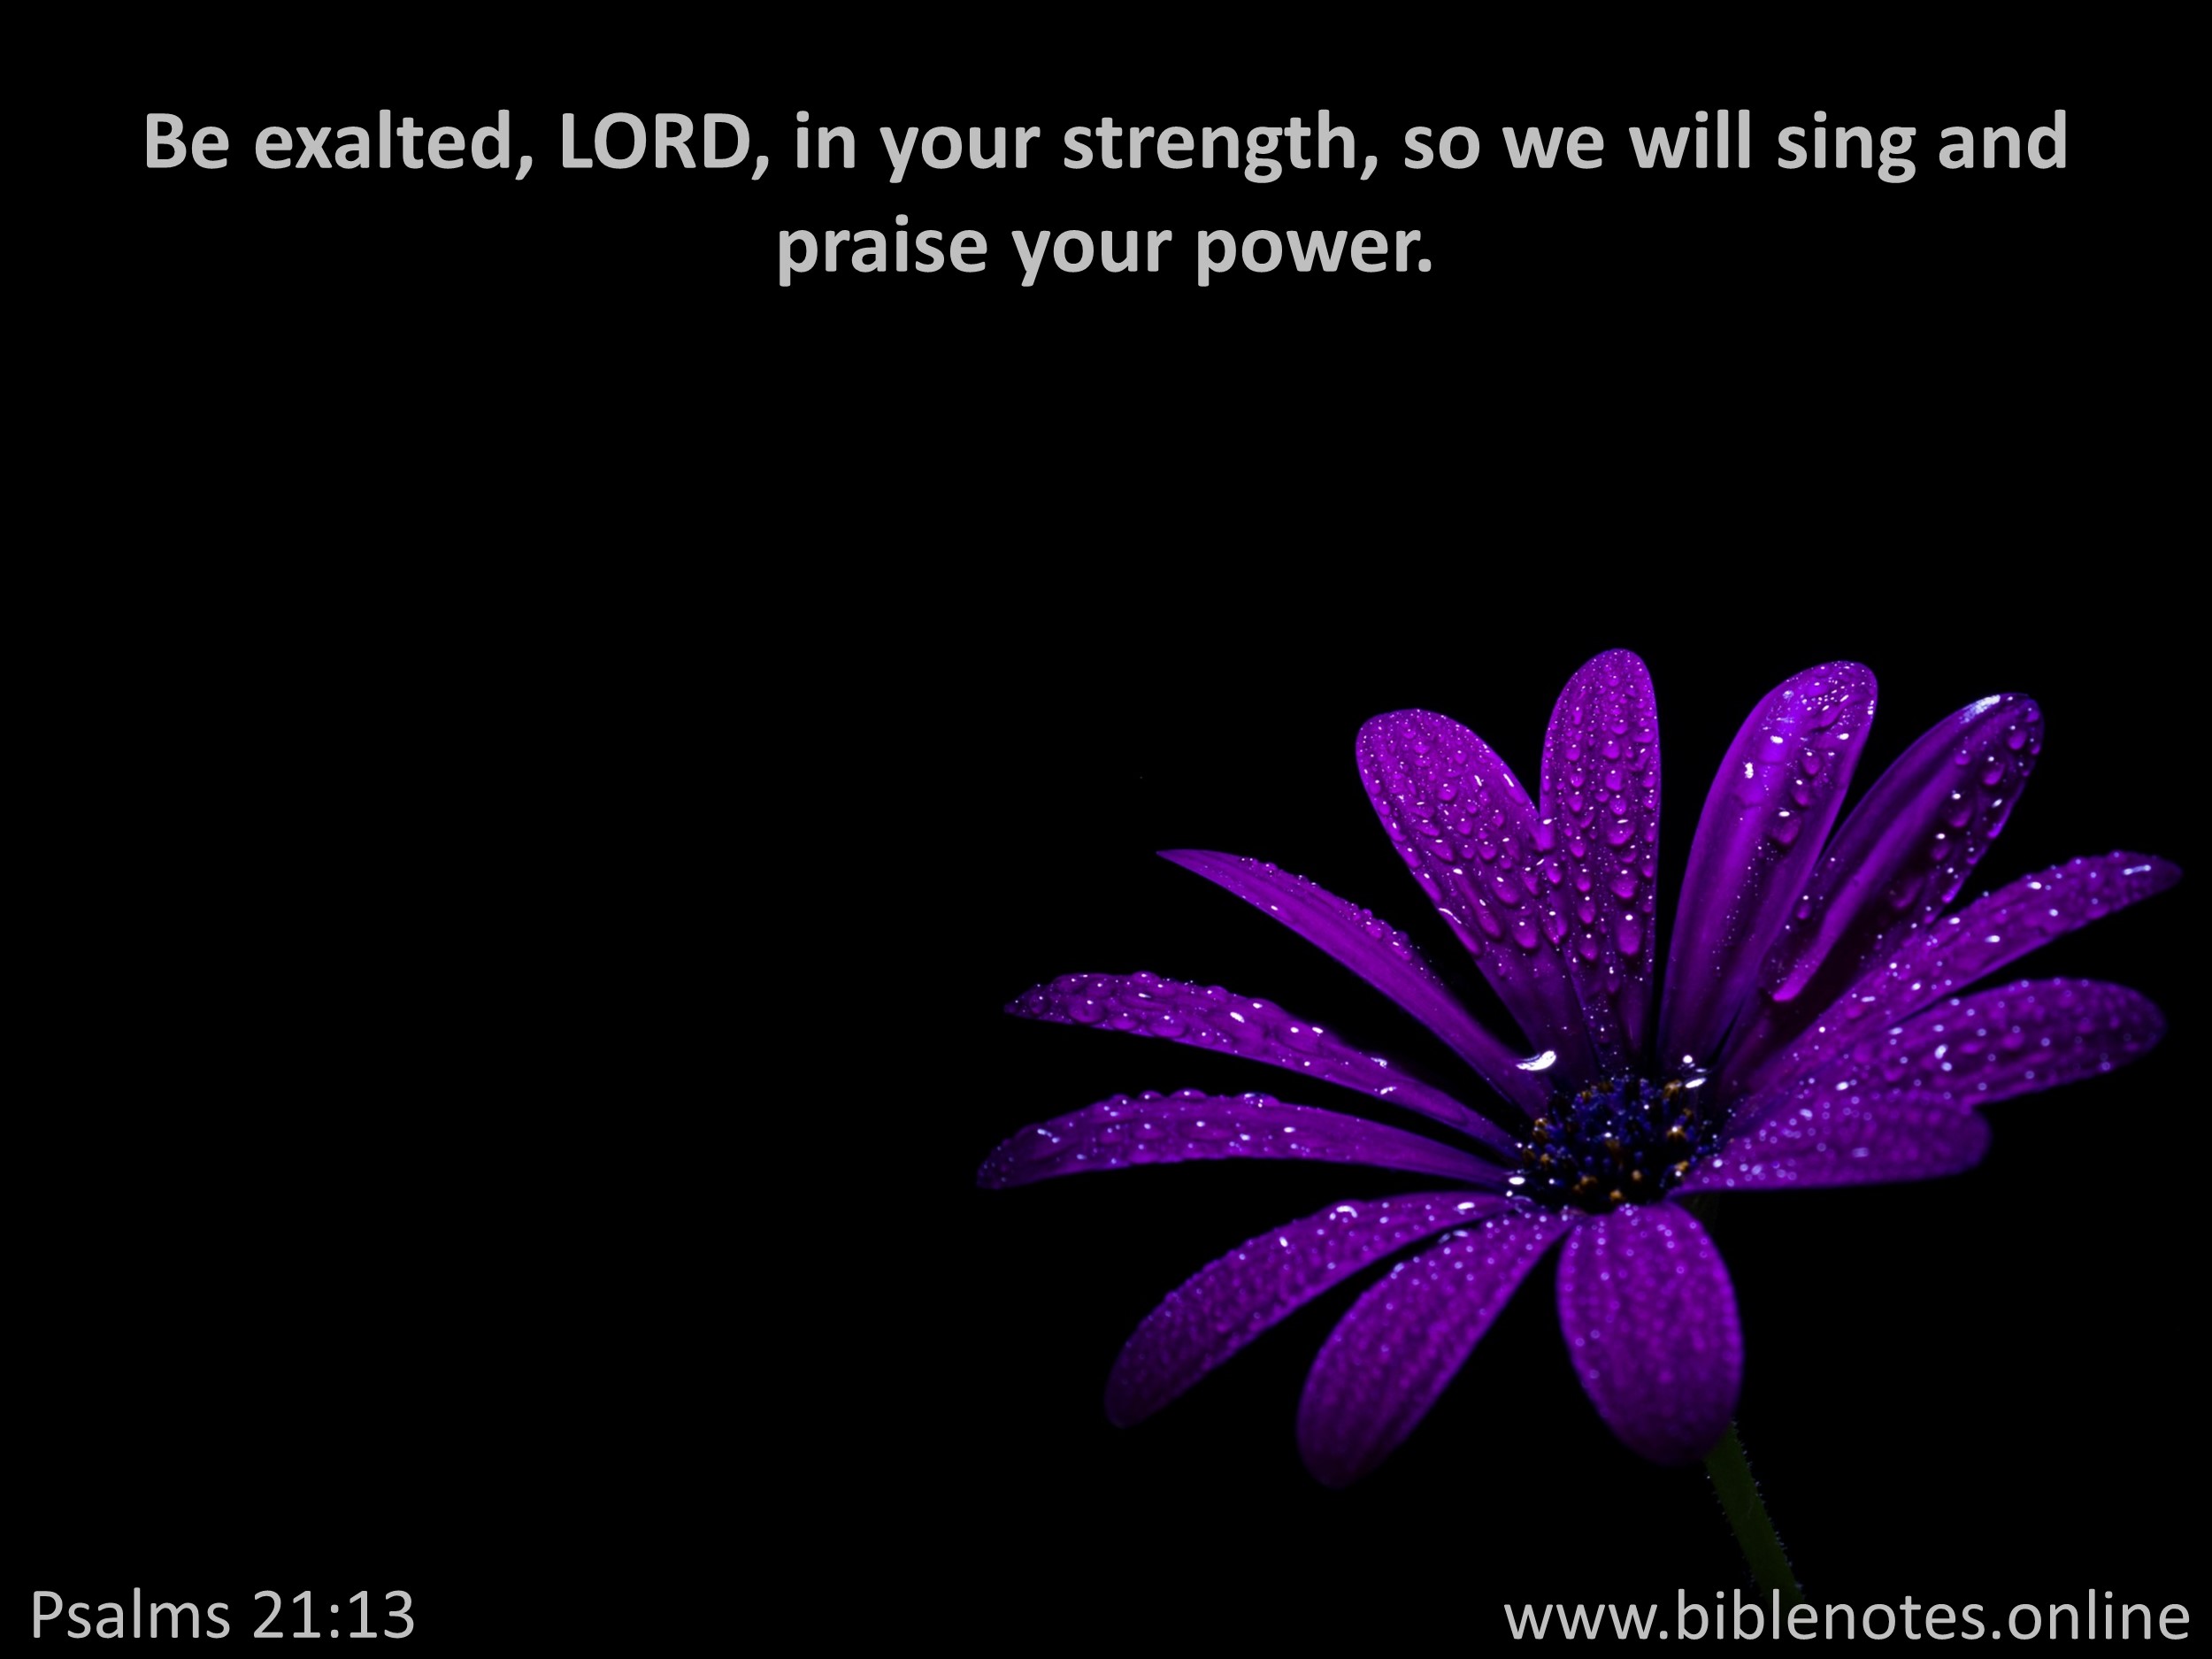 Bible Verse from Psalms Chapter 21